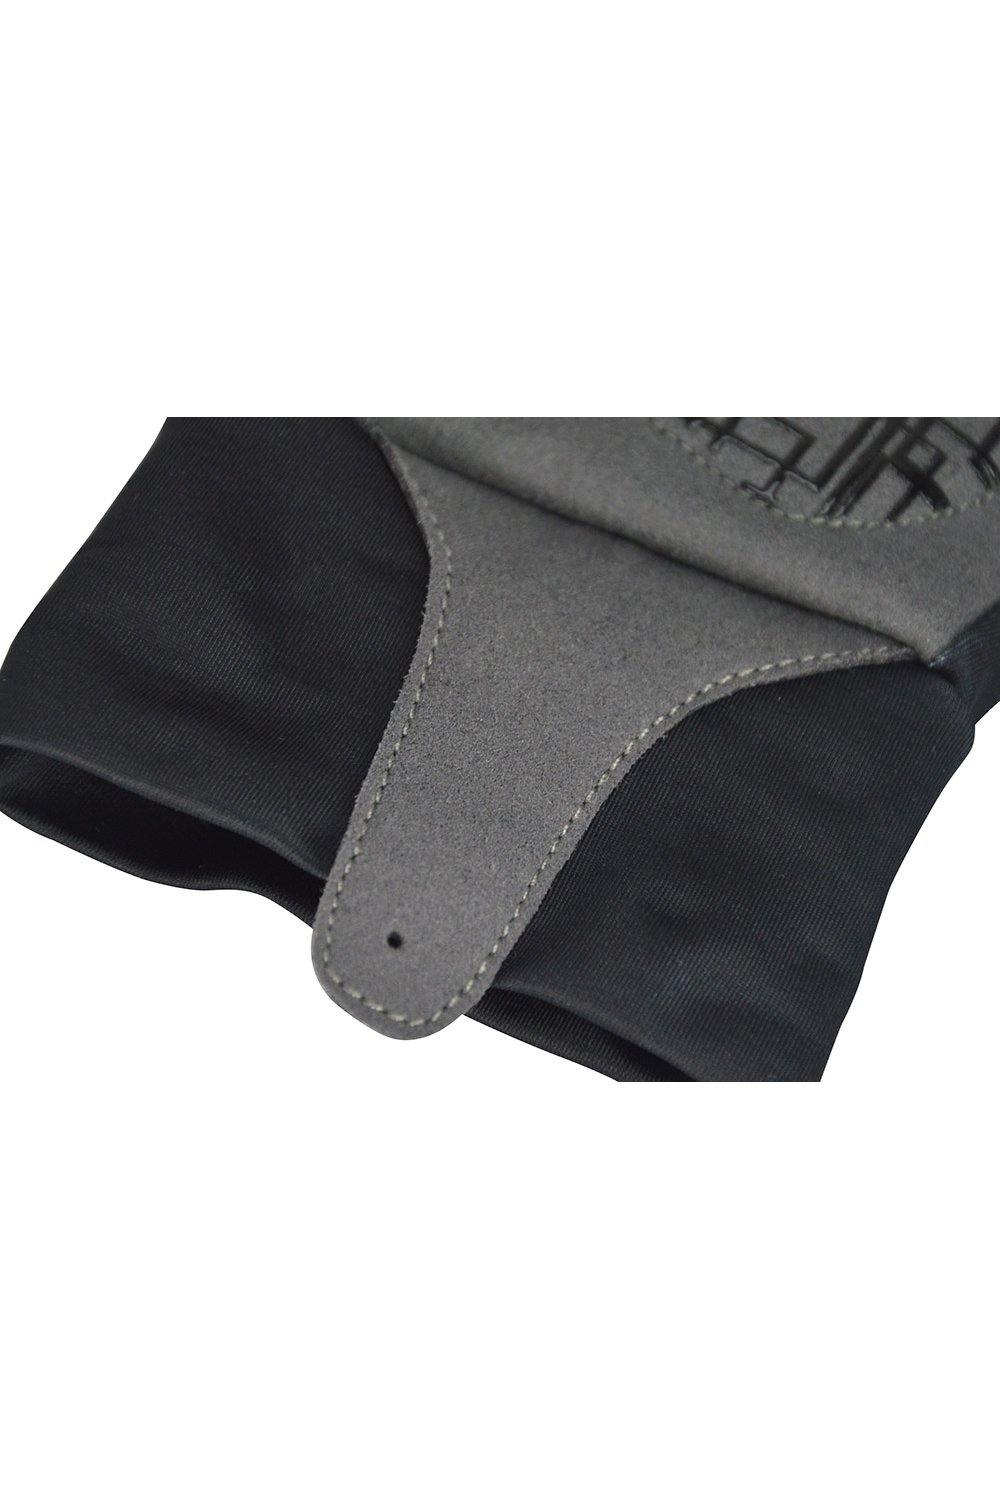 Sundried Touch Screen Cycle Gloves Gloves Activewear